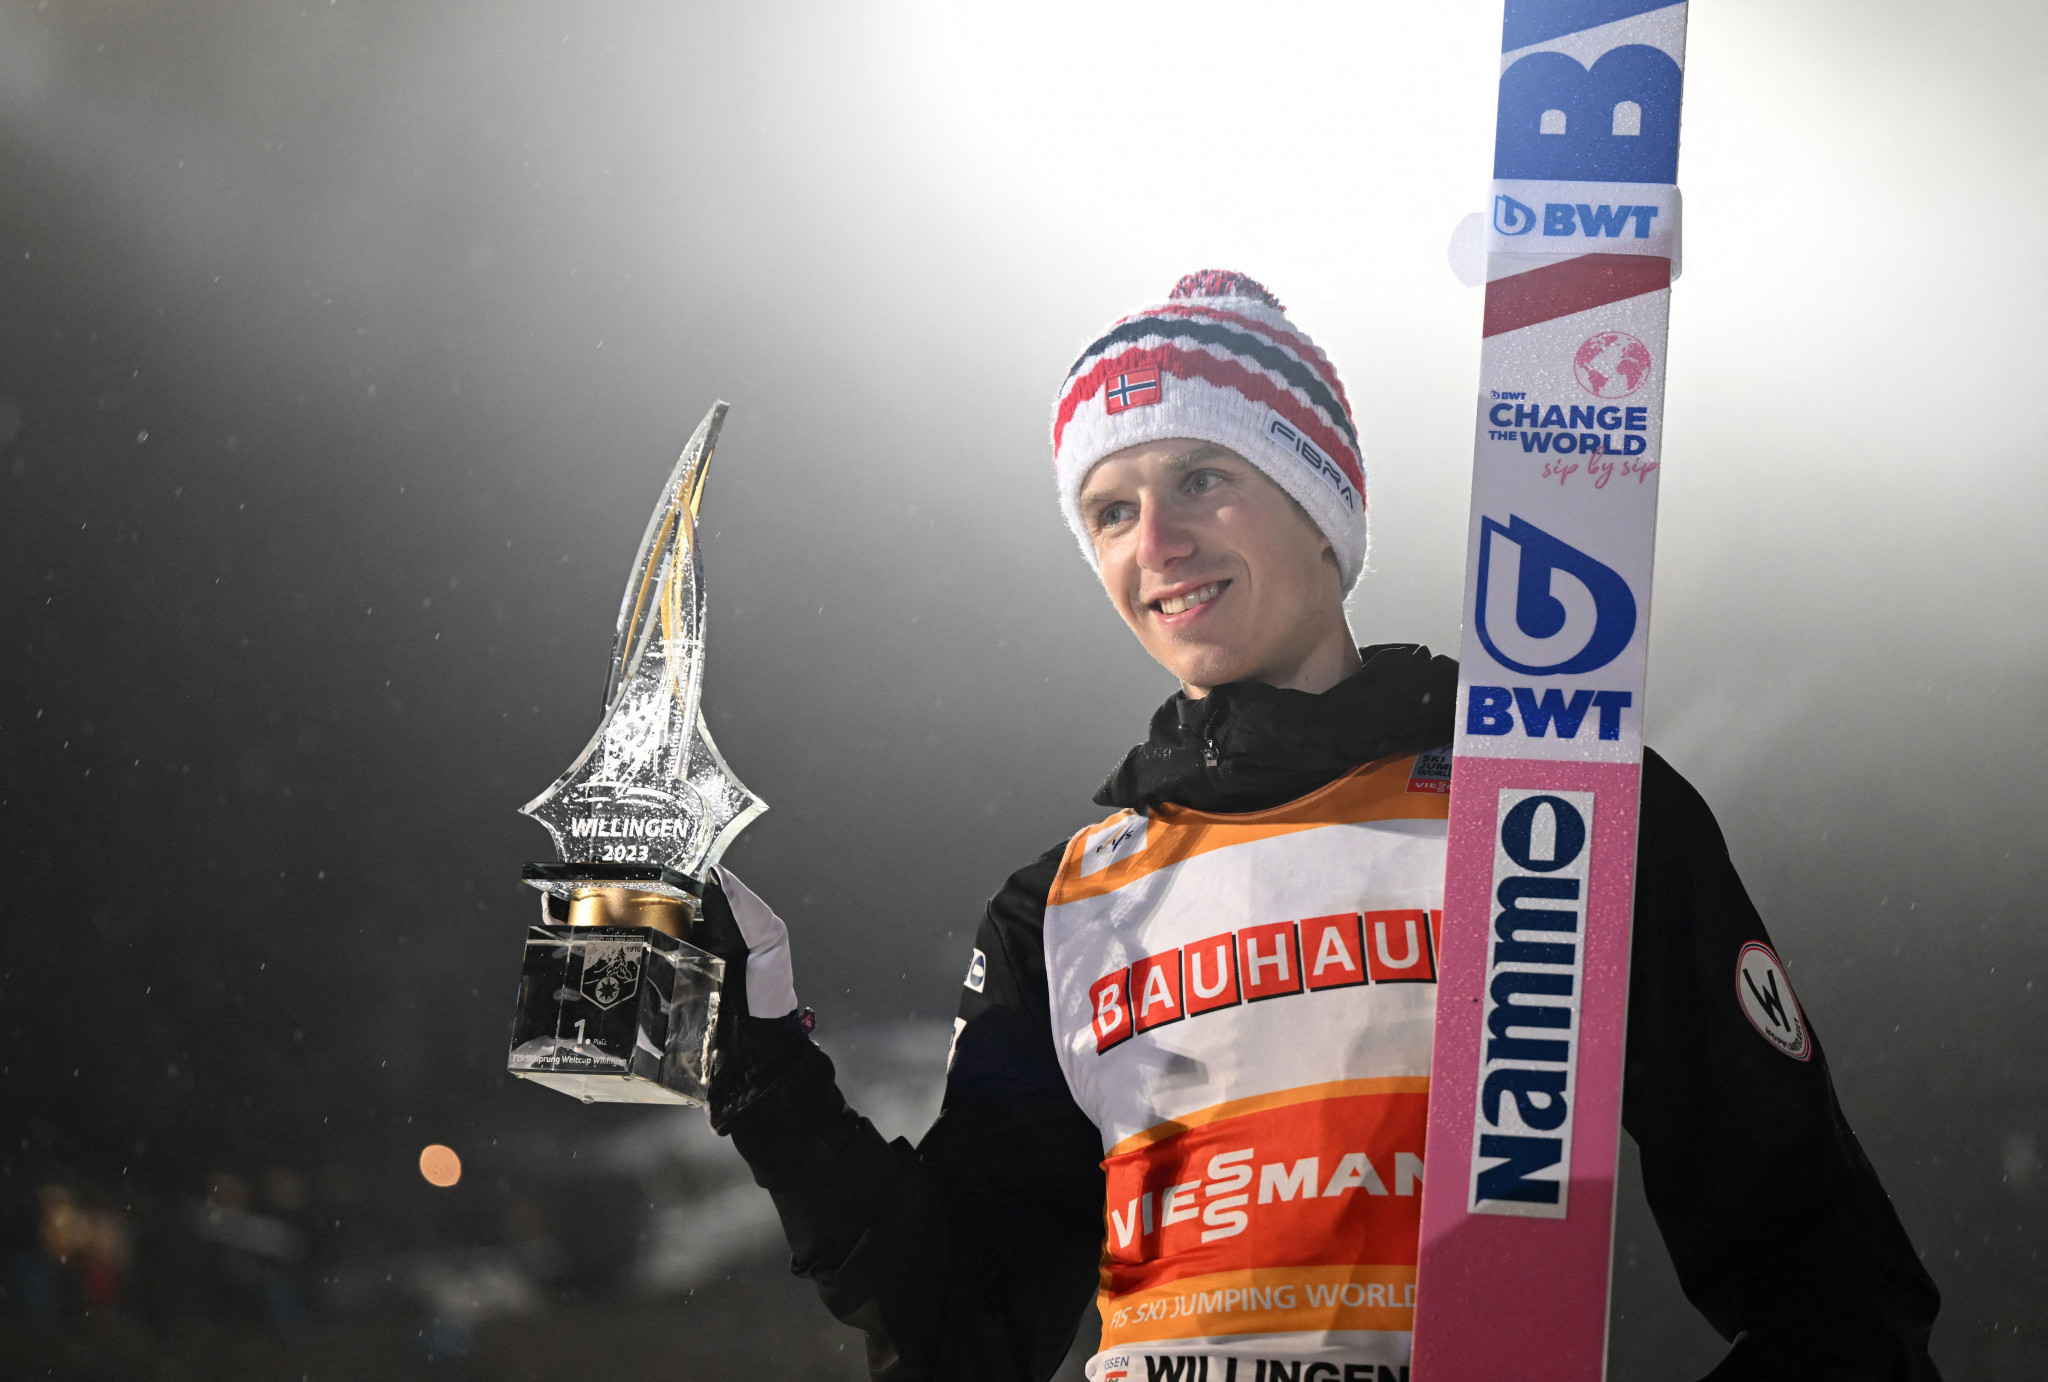 Granerud earns fourth straight Ski Jumping World Cup win in Willingen